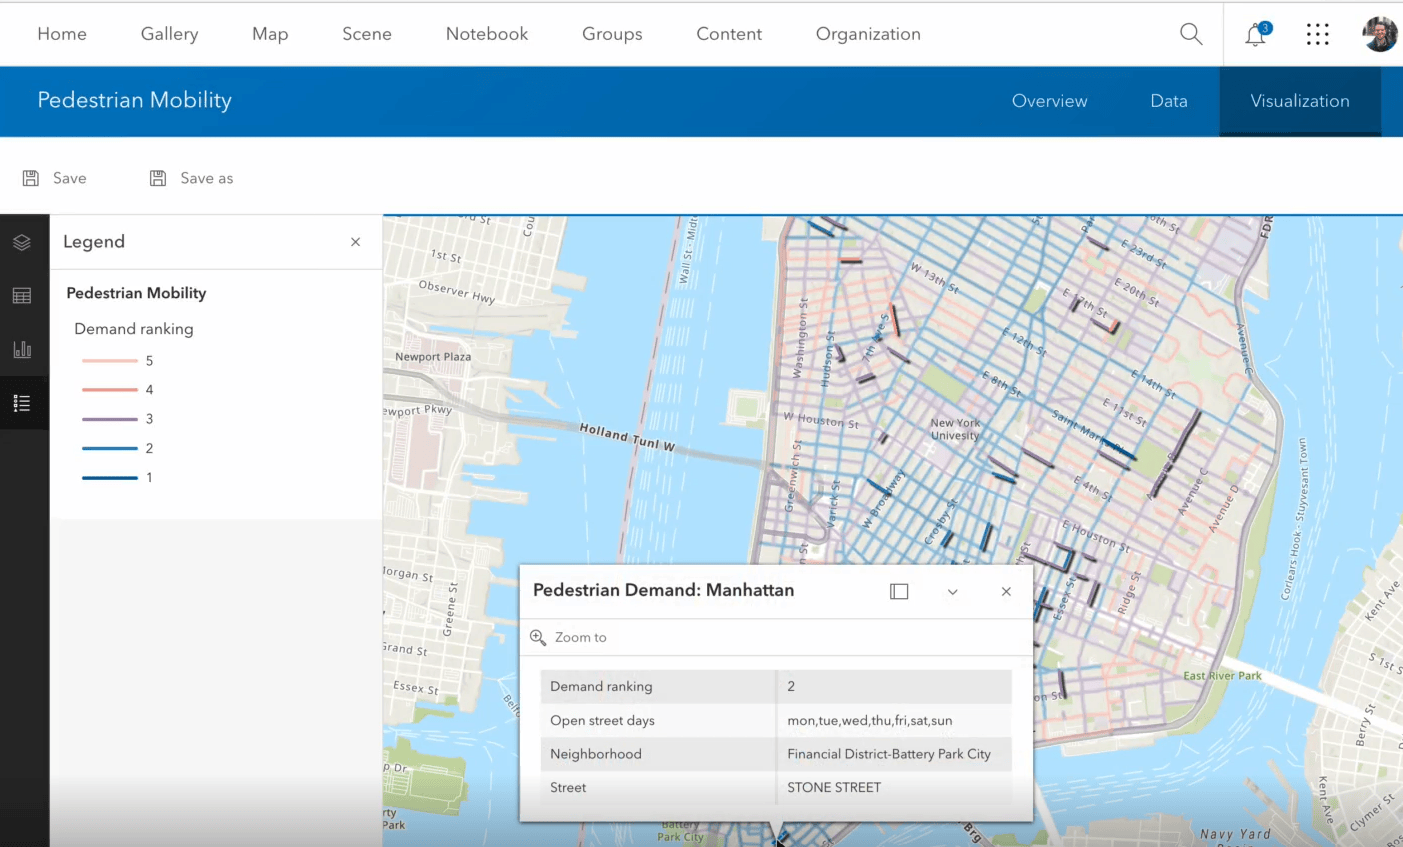 The resultant feature layer includes street data categorized based on pedestrian mobility demand.